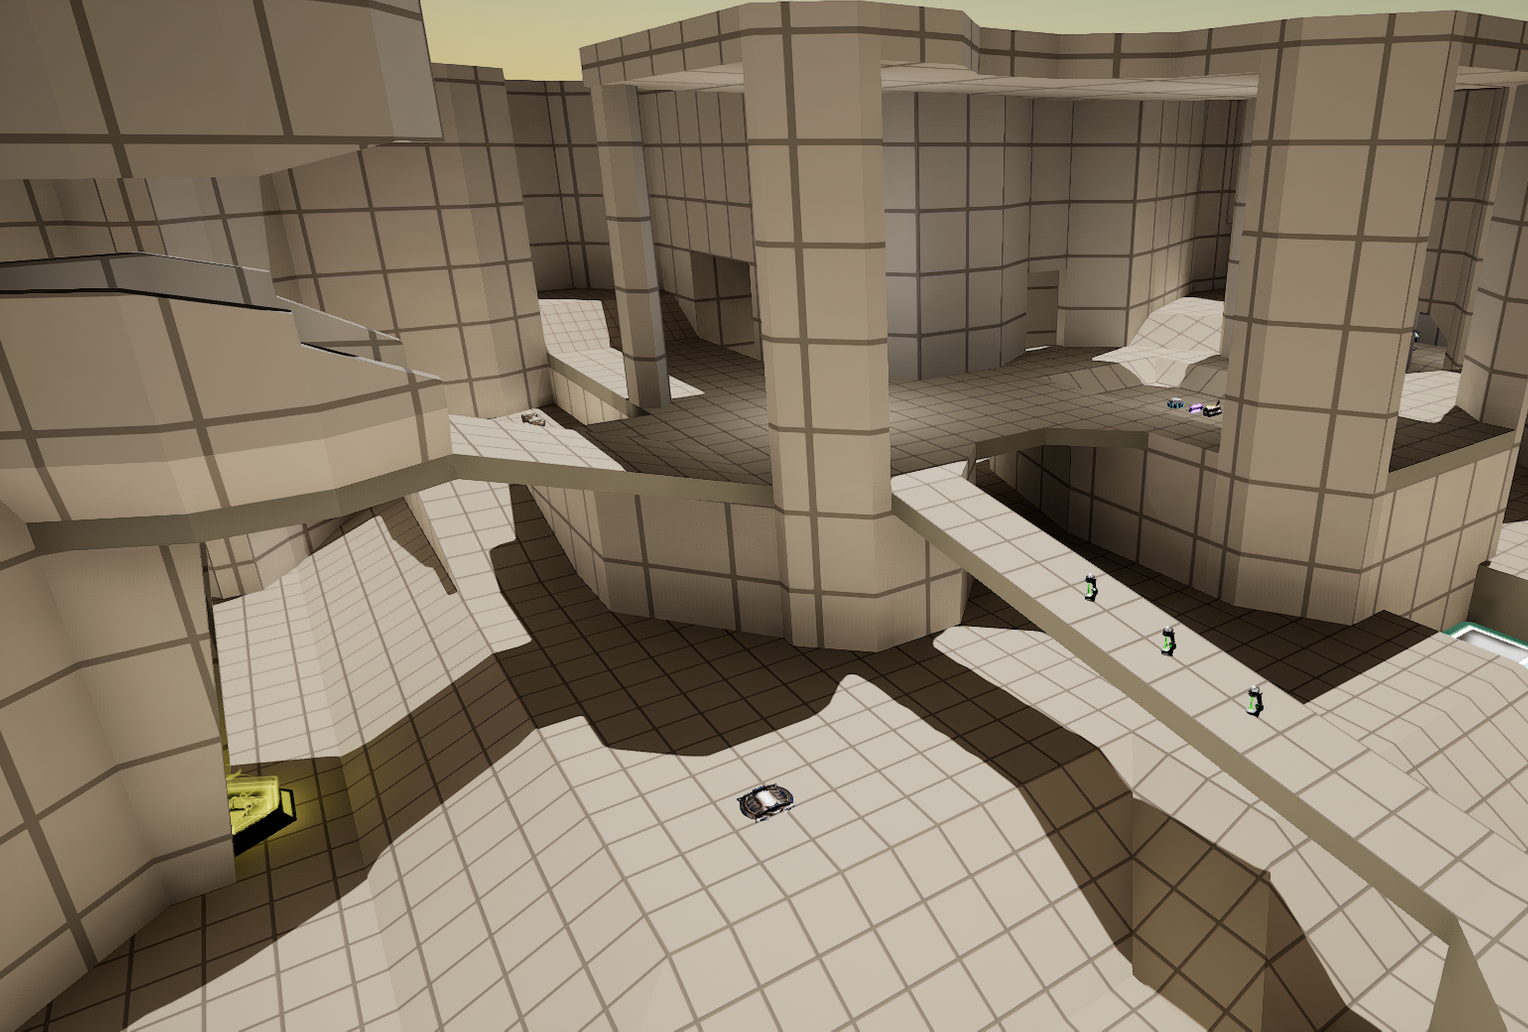 Area north. Blockout Level Design Uncharted. Блокаут Blockout уровня. White Box Level Design анчартед. Ue4 Level Blockout.